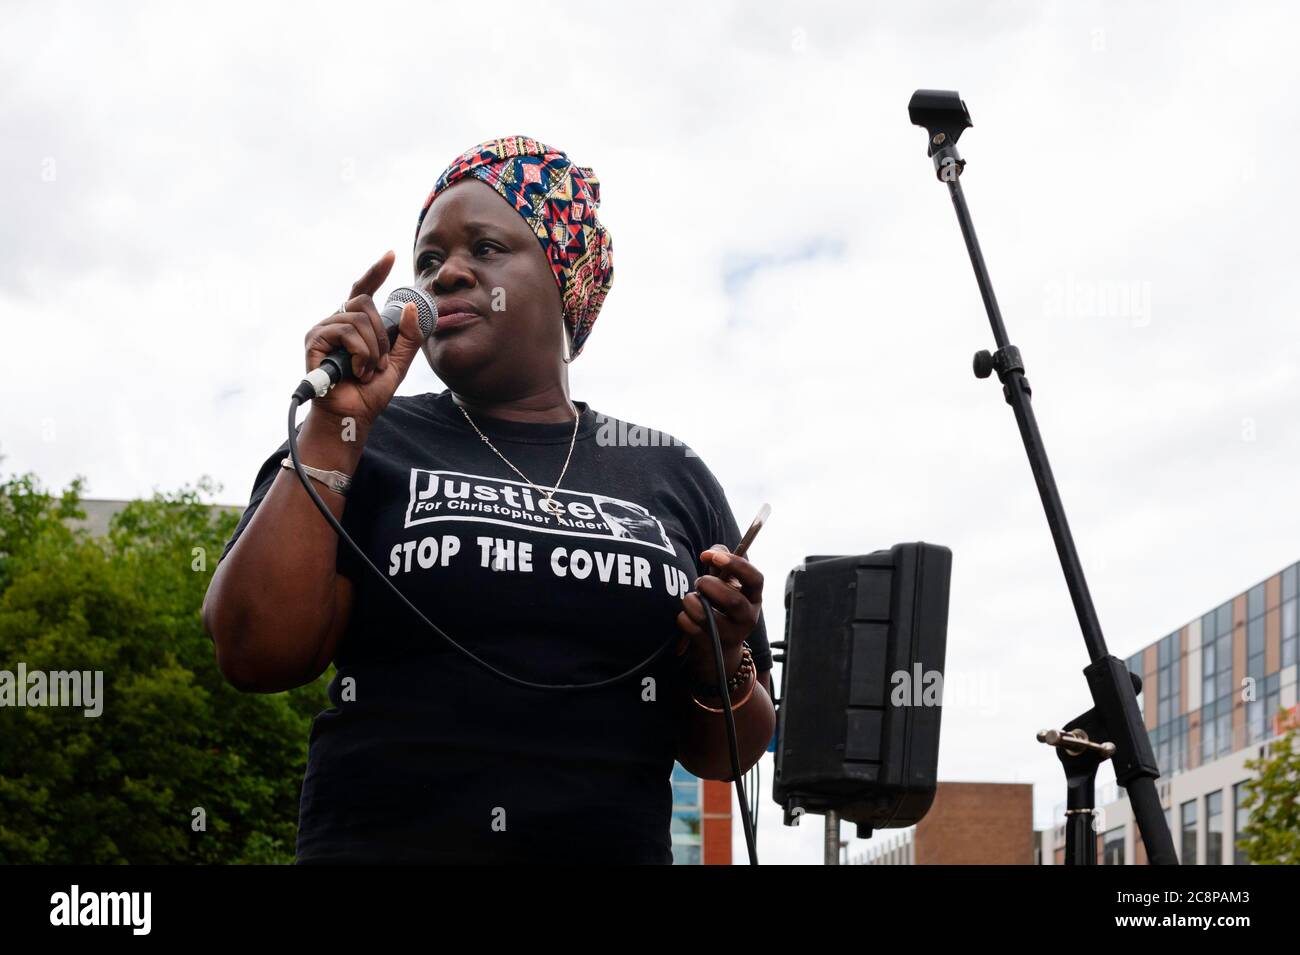 HULL, UK - JULY 11, 2020: Janet Alder speakeing at Black Lives Matter rally demanding justice for her brother's death in police custody on July 11, 20 Stock Photo